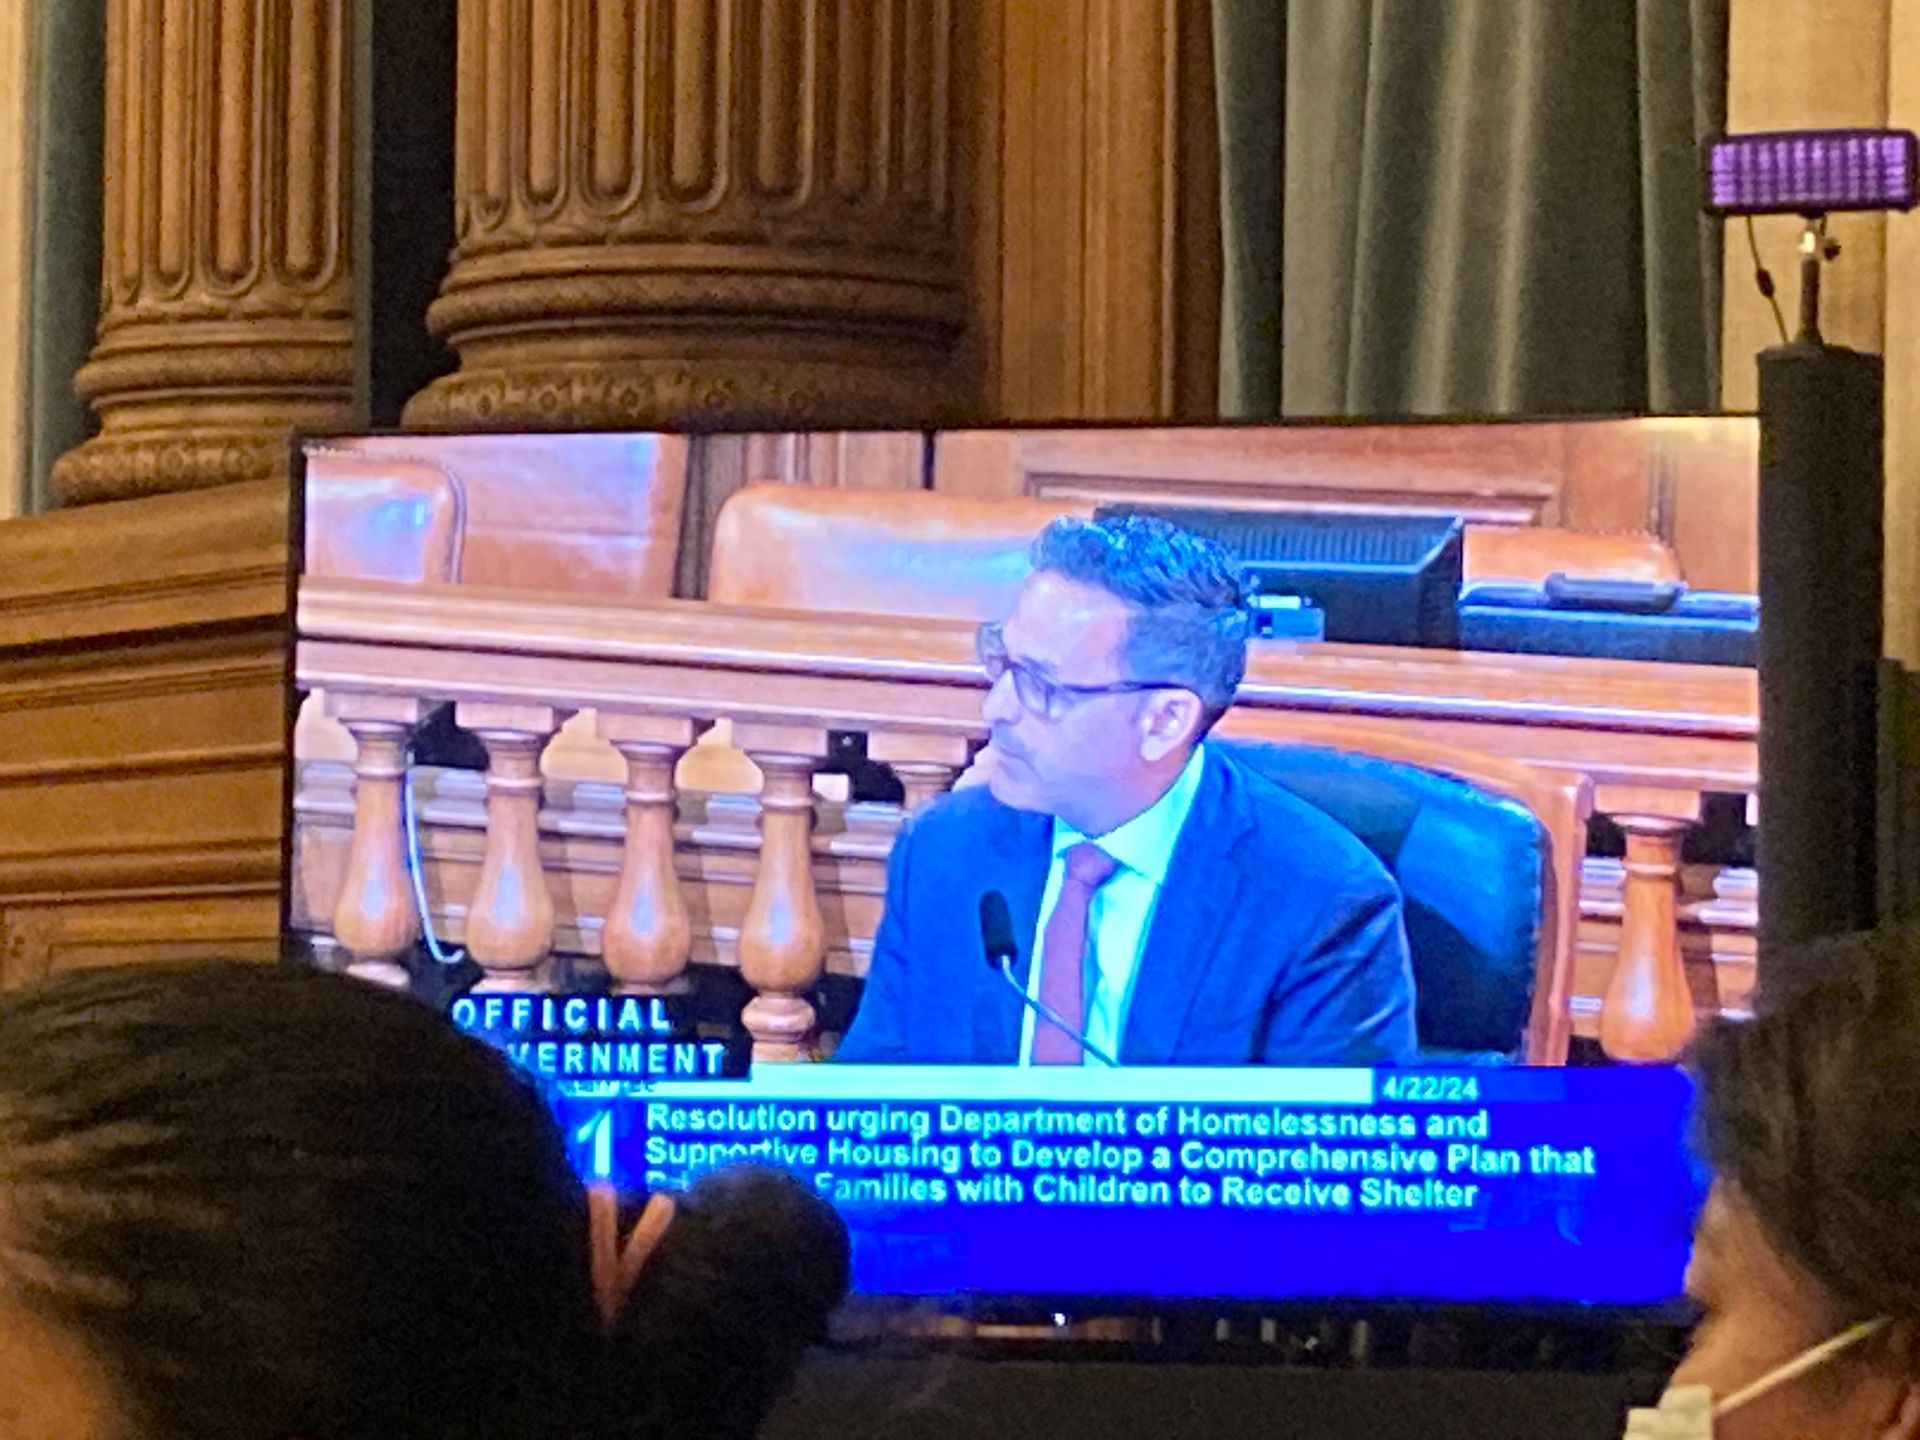 A picture of the TV monitor showing Ahsha Safai speaking to the Dept. of Homelessness urging to support housing to develop a comprehensive plan that shelters families with children. 